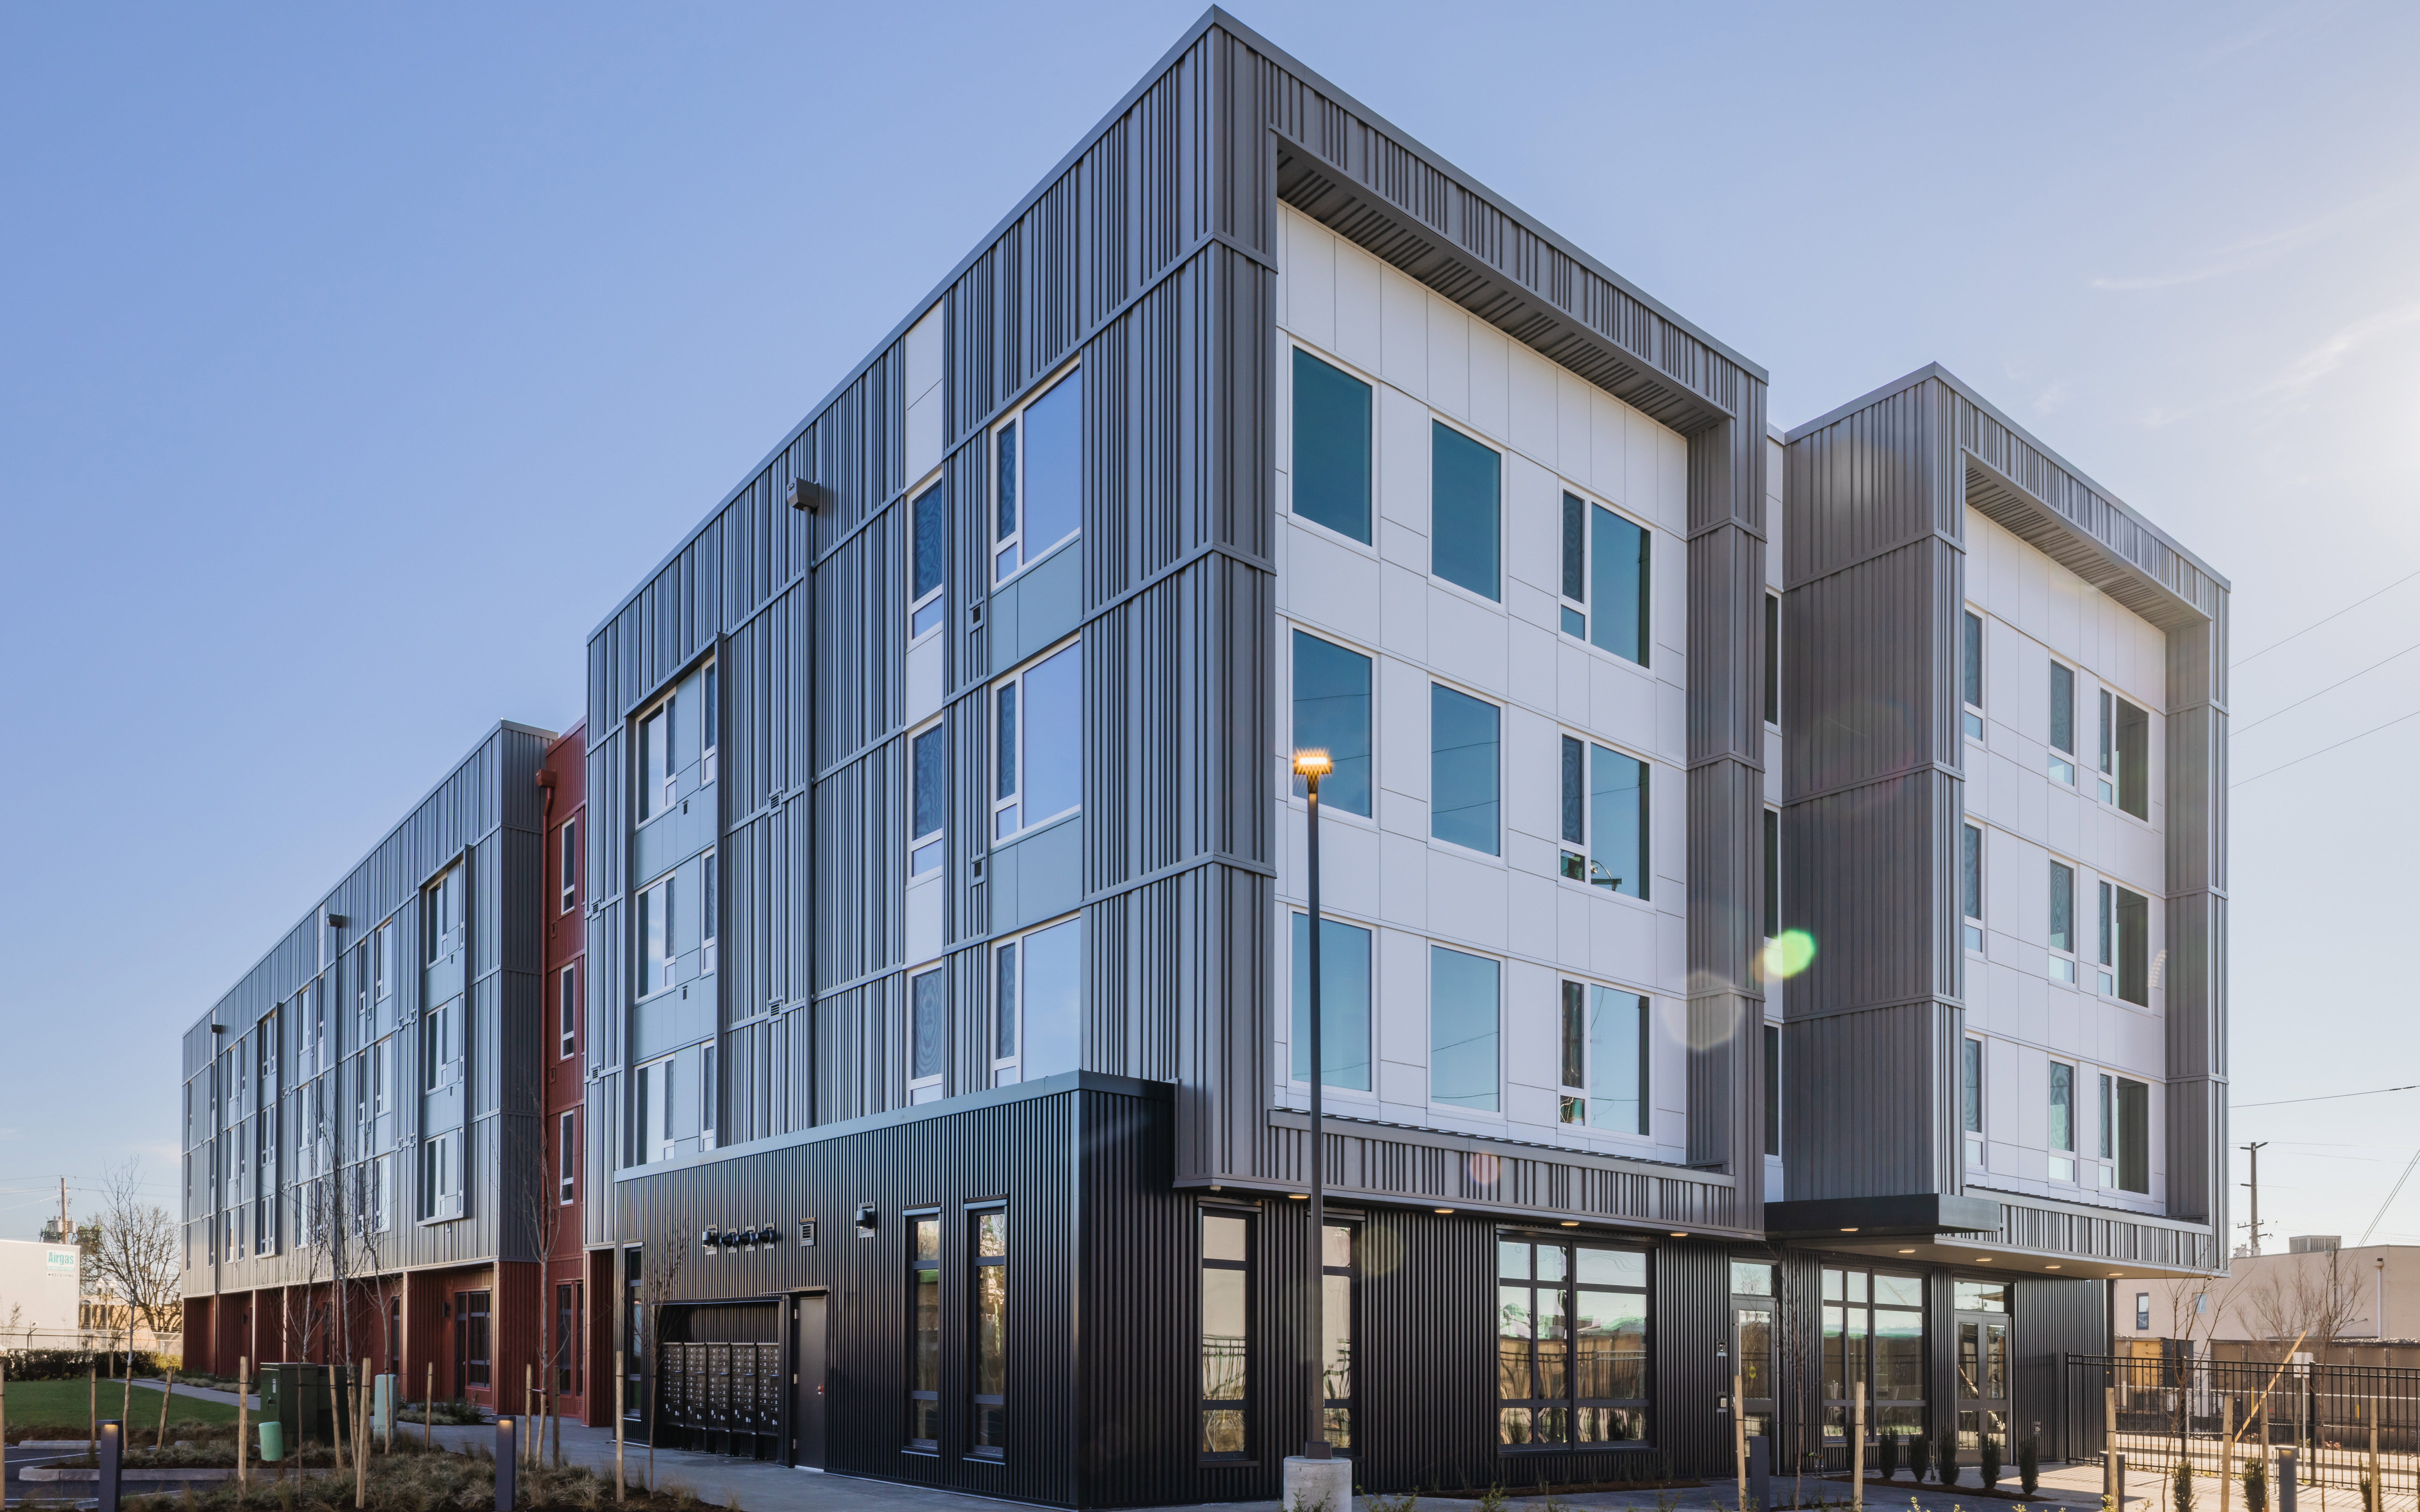 The Jefferson Apartments near the Vancouver, WA Waterfront features AEP Span's metal siding in Flex Series, Span-Lok™ hp and Box Rib™.